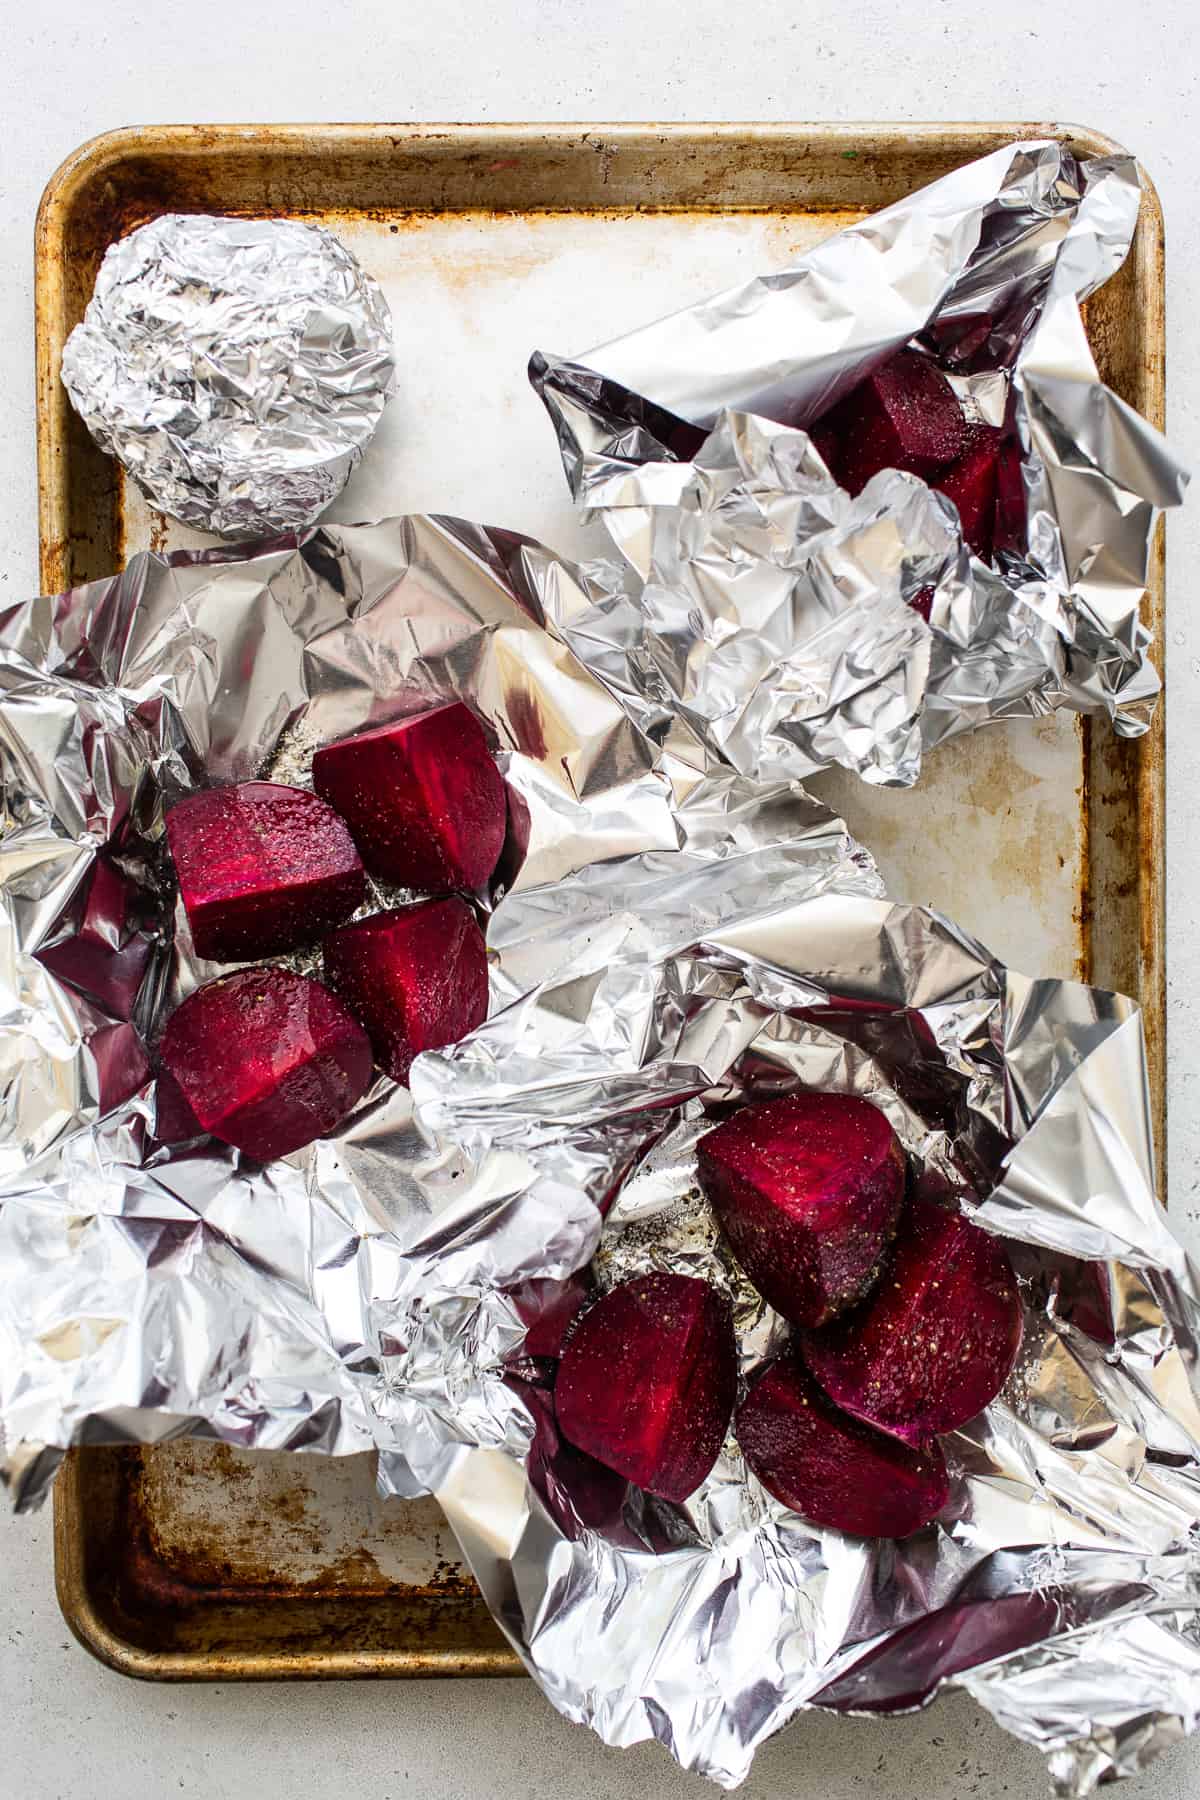 Sliced beets wrapped in tin foil.